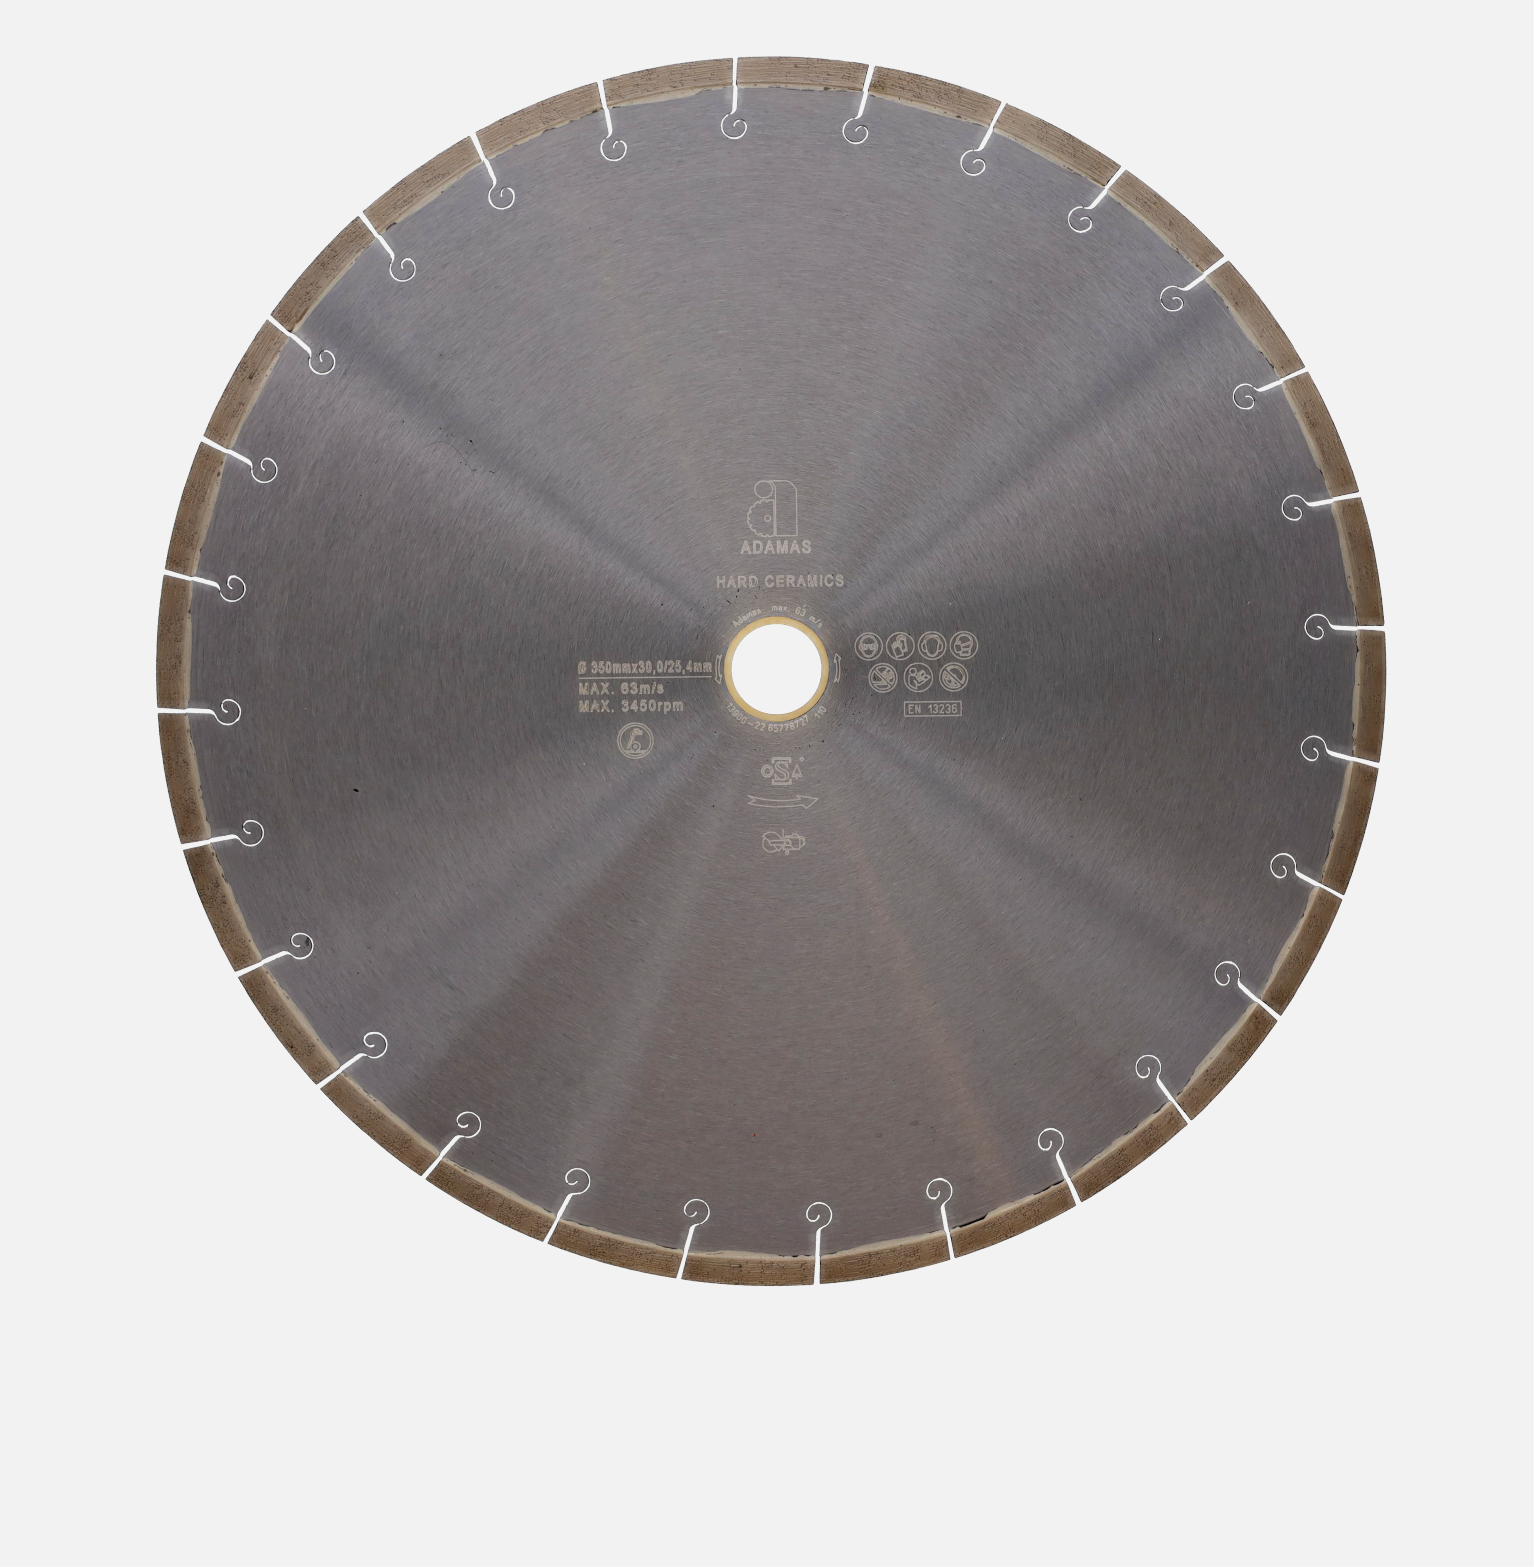 Product category - Table saw cutting discs